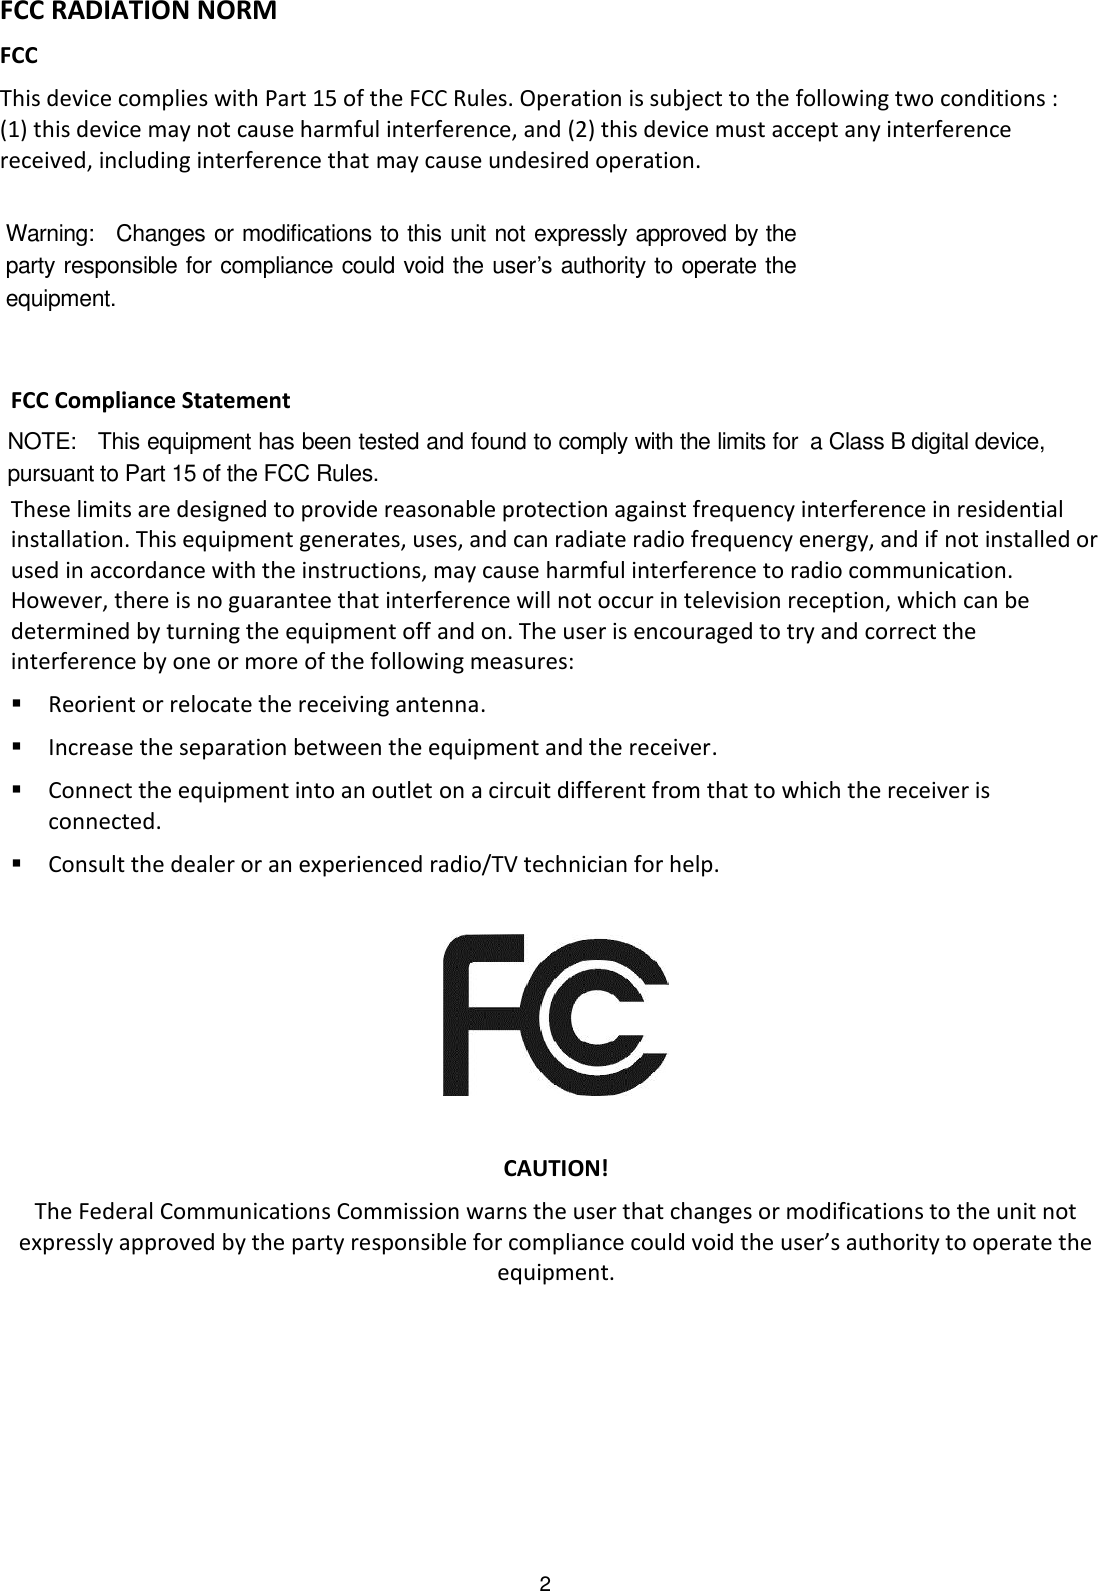 pursuant to Part 15 of tha Class B digital device,2 FCC RADIATION NORM FCC This device complies with Part 15 of the FCC Rules. Operation is subject to the following two conditions : (1) this device may not cause harmful interference, and (2) this device must accept any interference received, including interference that may cause undesired operation.   FCC Compliance Statement These limits are designed to provide reasonable protection against frequency interference in residential installation. This equipment generates, uses, and can radiate radio frequency energy, and if not installed or used in accordance with the instructions, may cause harmful interference to radio communication. However, there is no guarantee that interference will not occur in television reception, which can be determined by turning the equipment off and on. The user is encouraged to try and correct the interference by one or more of the following measures:  Reorient or relocate the receiving antenna.  Increase the separation between the equipment and the receiver.  Connect the equipment into an outlet on a circuit different from that to which the receiver is connected.  Consult the dealer or an experienced radio/TV technician for help.    CAUTION! The Federal Communications Commission warns the user that changes or modifications to the unit not expressly approved by the party responsible for compliance could void the user’s authority to operate the equipment. Warning:    Changes or modifications to this unit not expressly approved by the party responsible for compliance could void the user’s authority to operate the equipment. e FCC Rules.      NOTE:    This equipment has been tested and found to comply with the limits for 